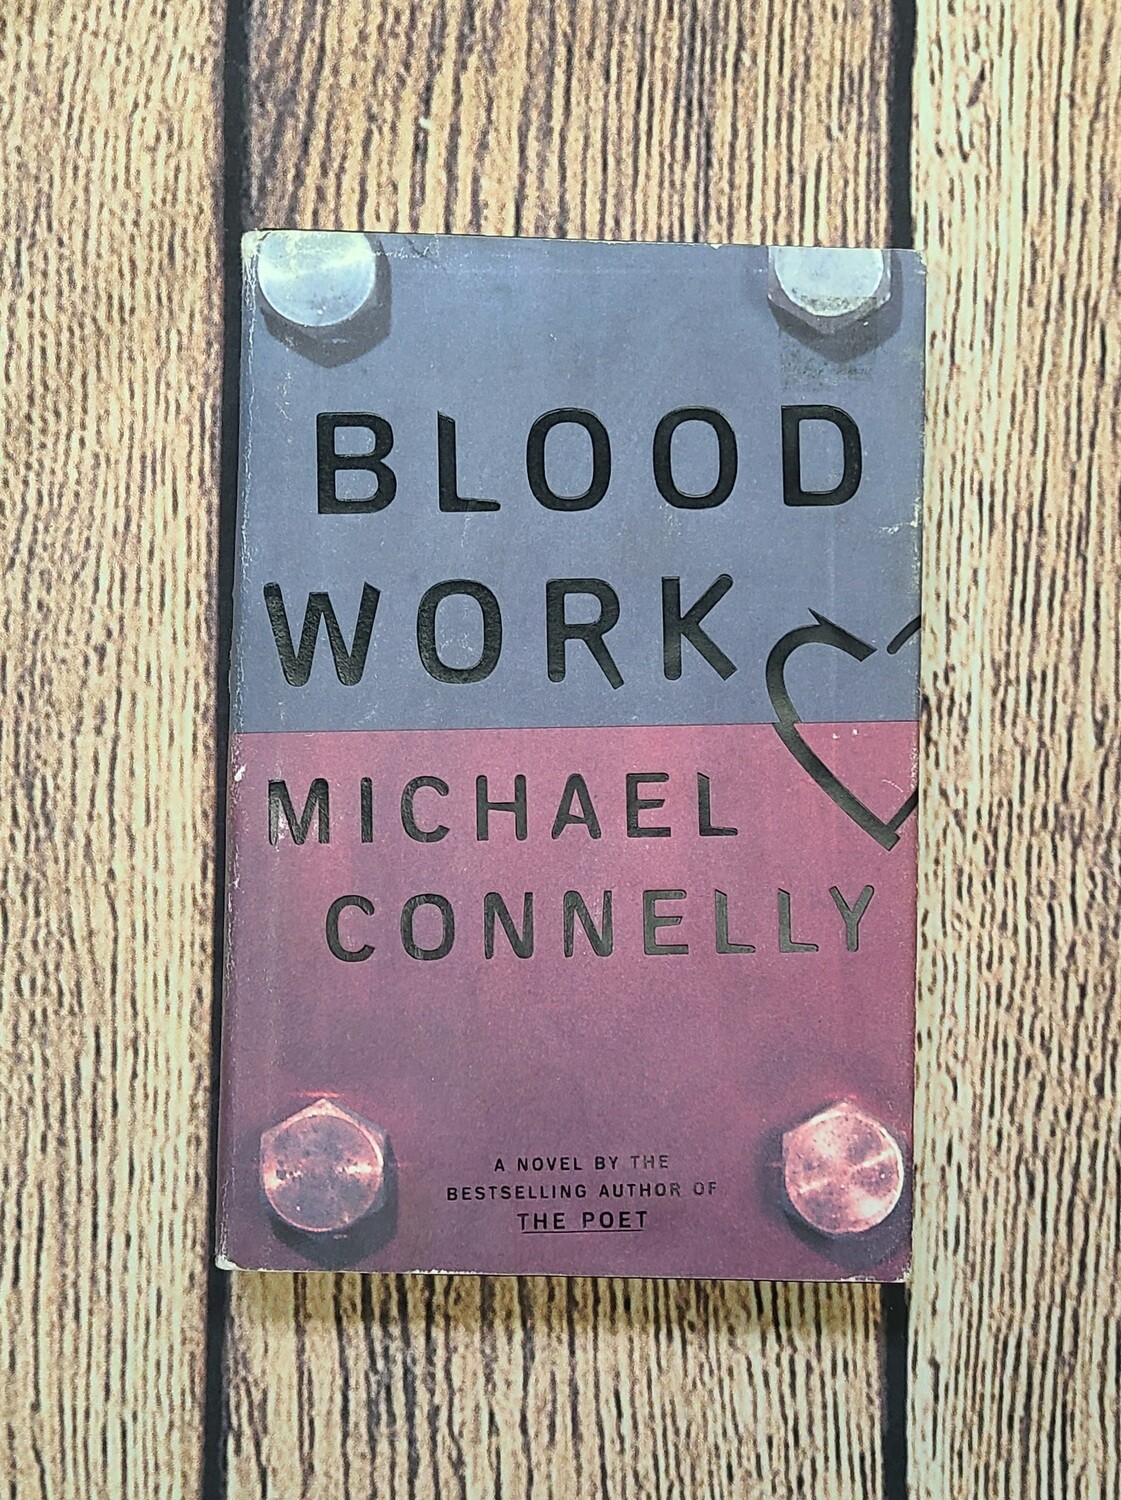 Blood Work by Michael Connelly - Hardback